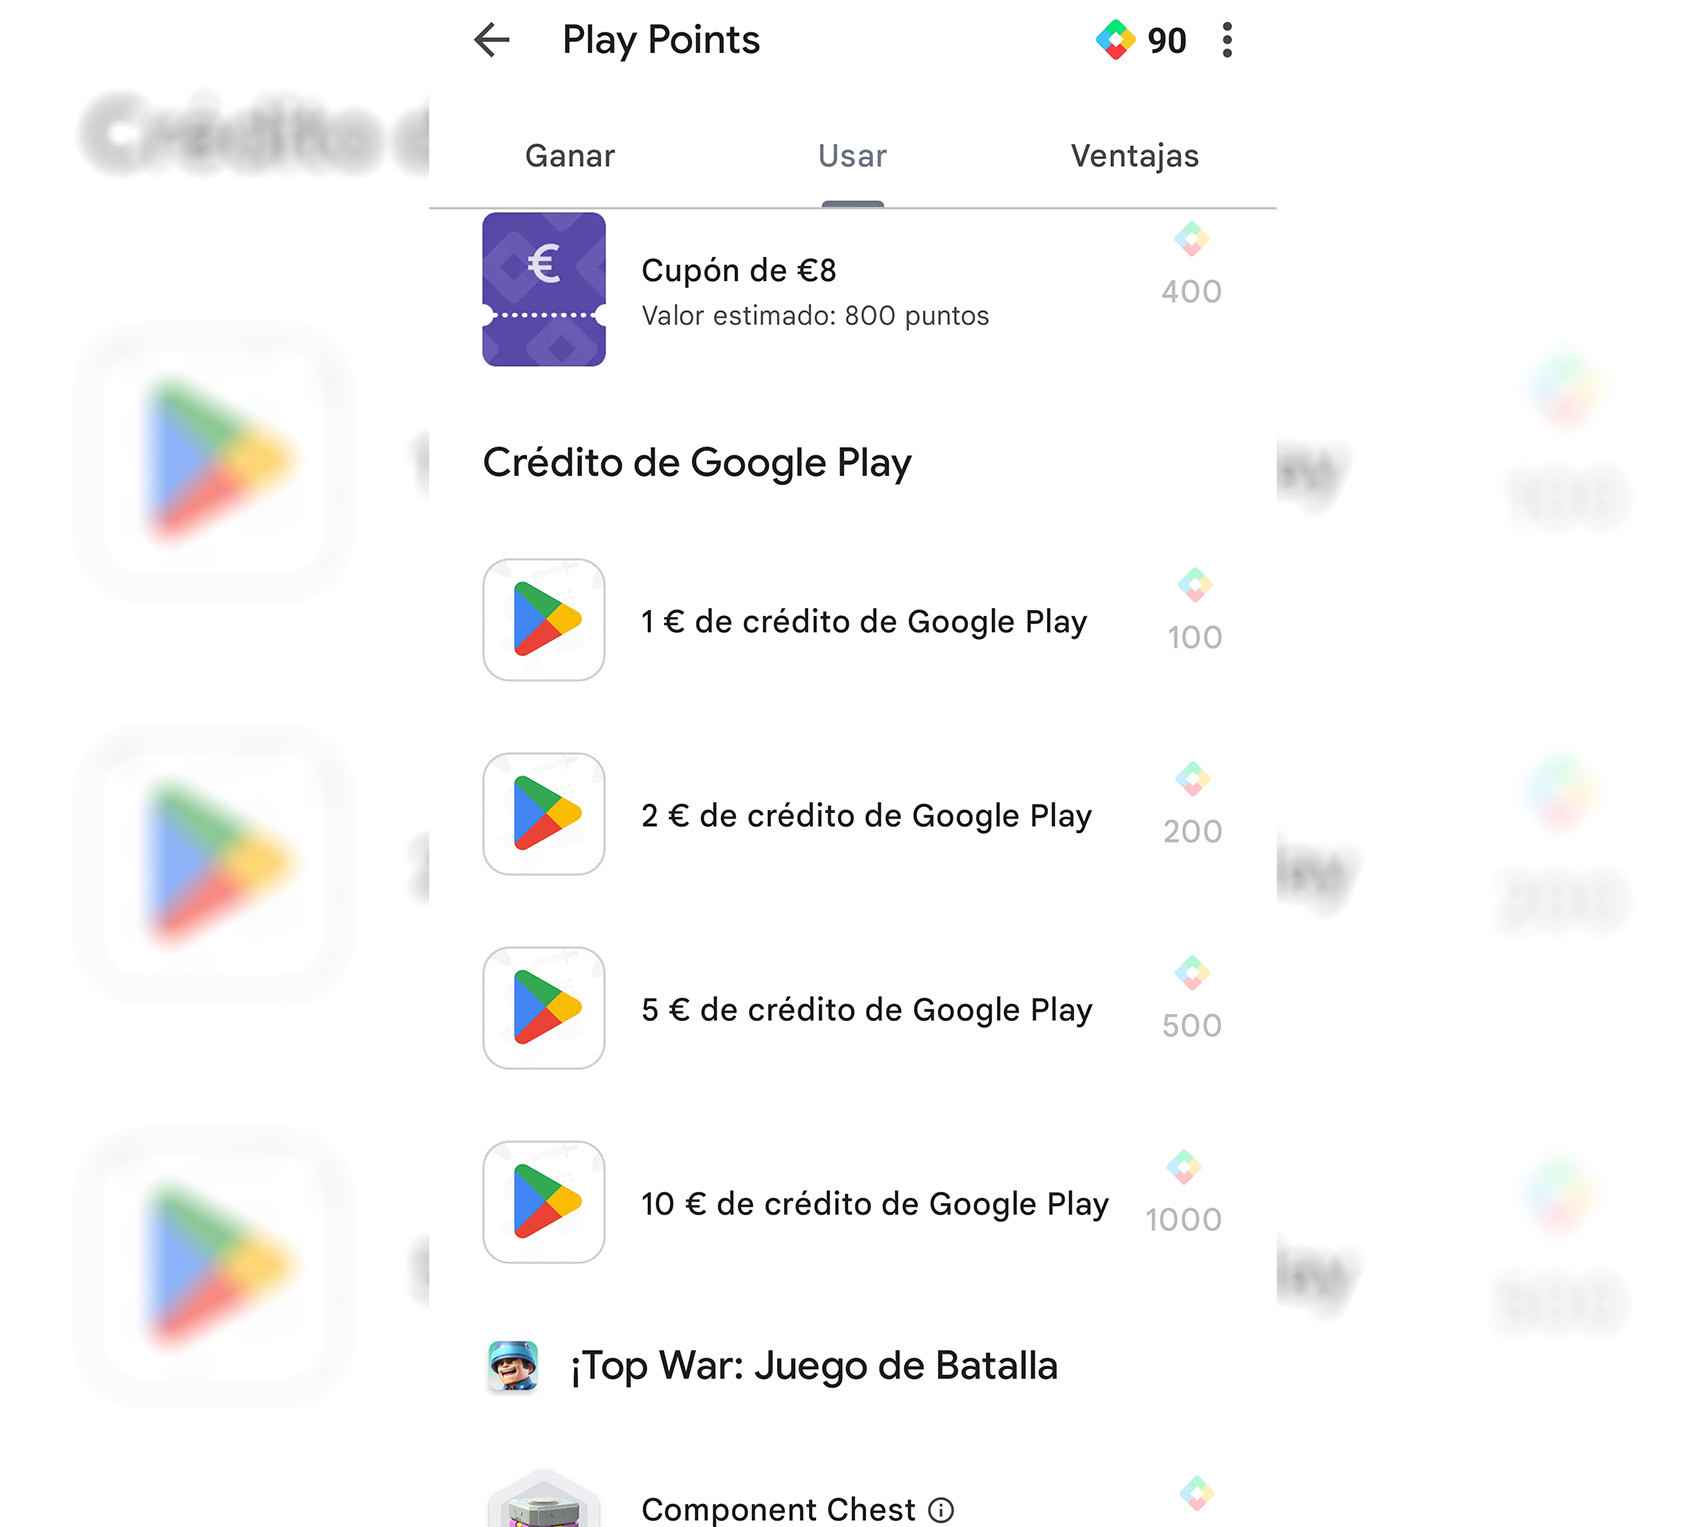 Credit redeemable on Google Play